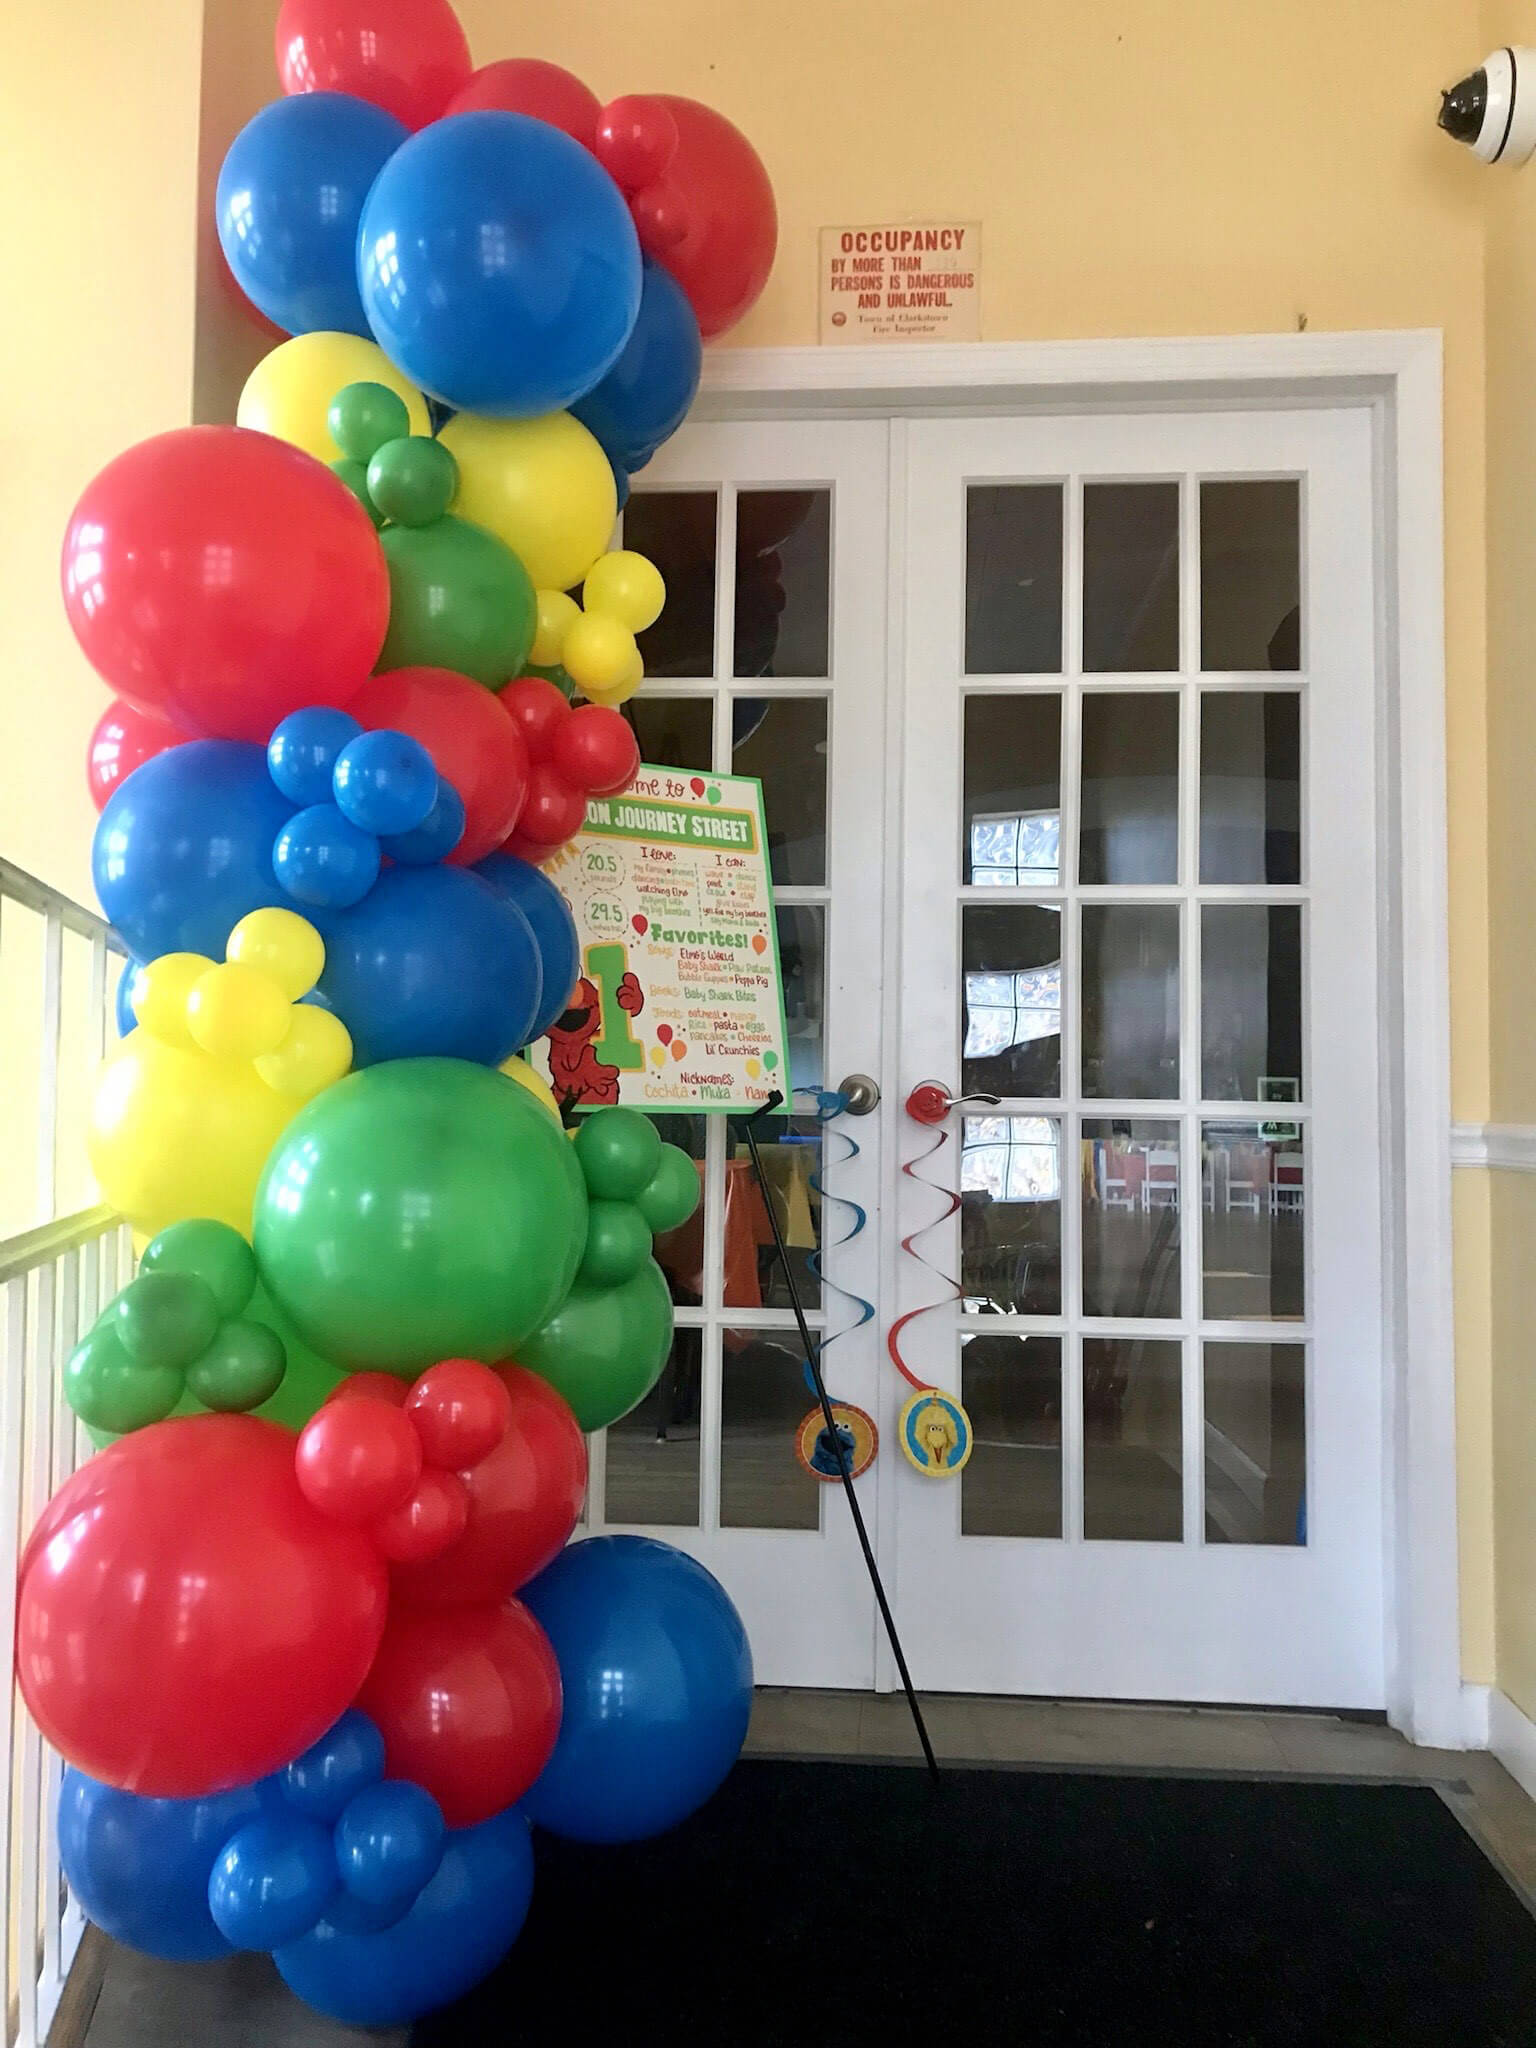 Clarkstown Church Facility Use for children's party